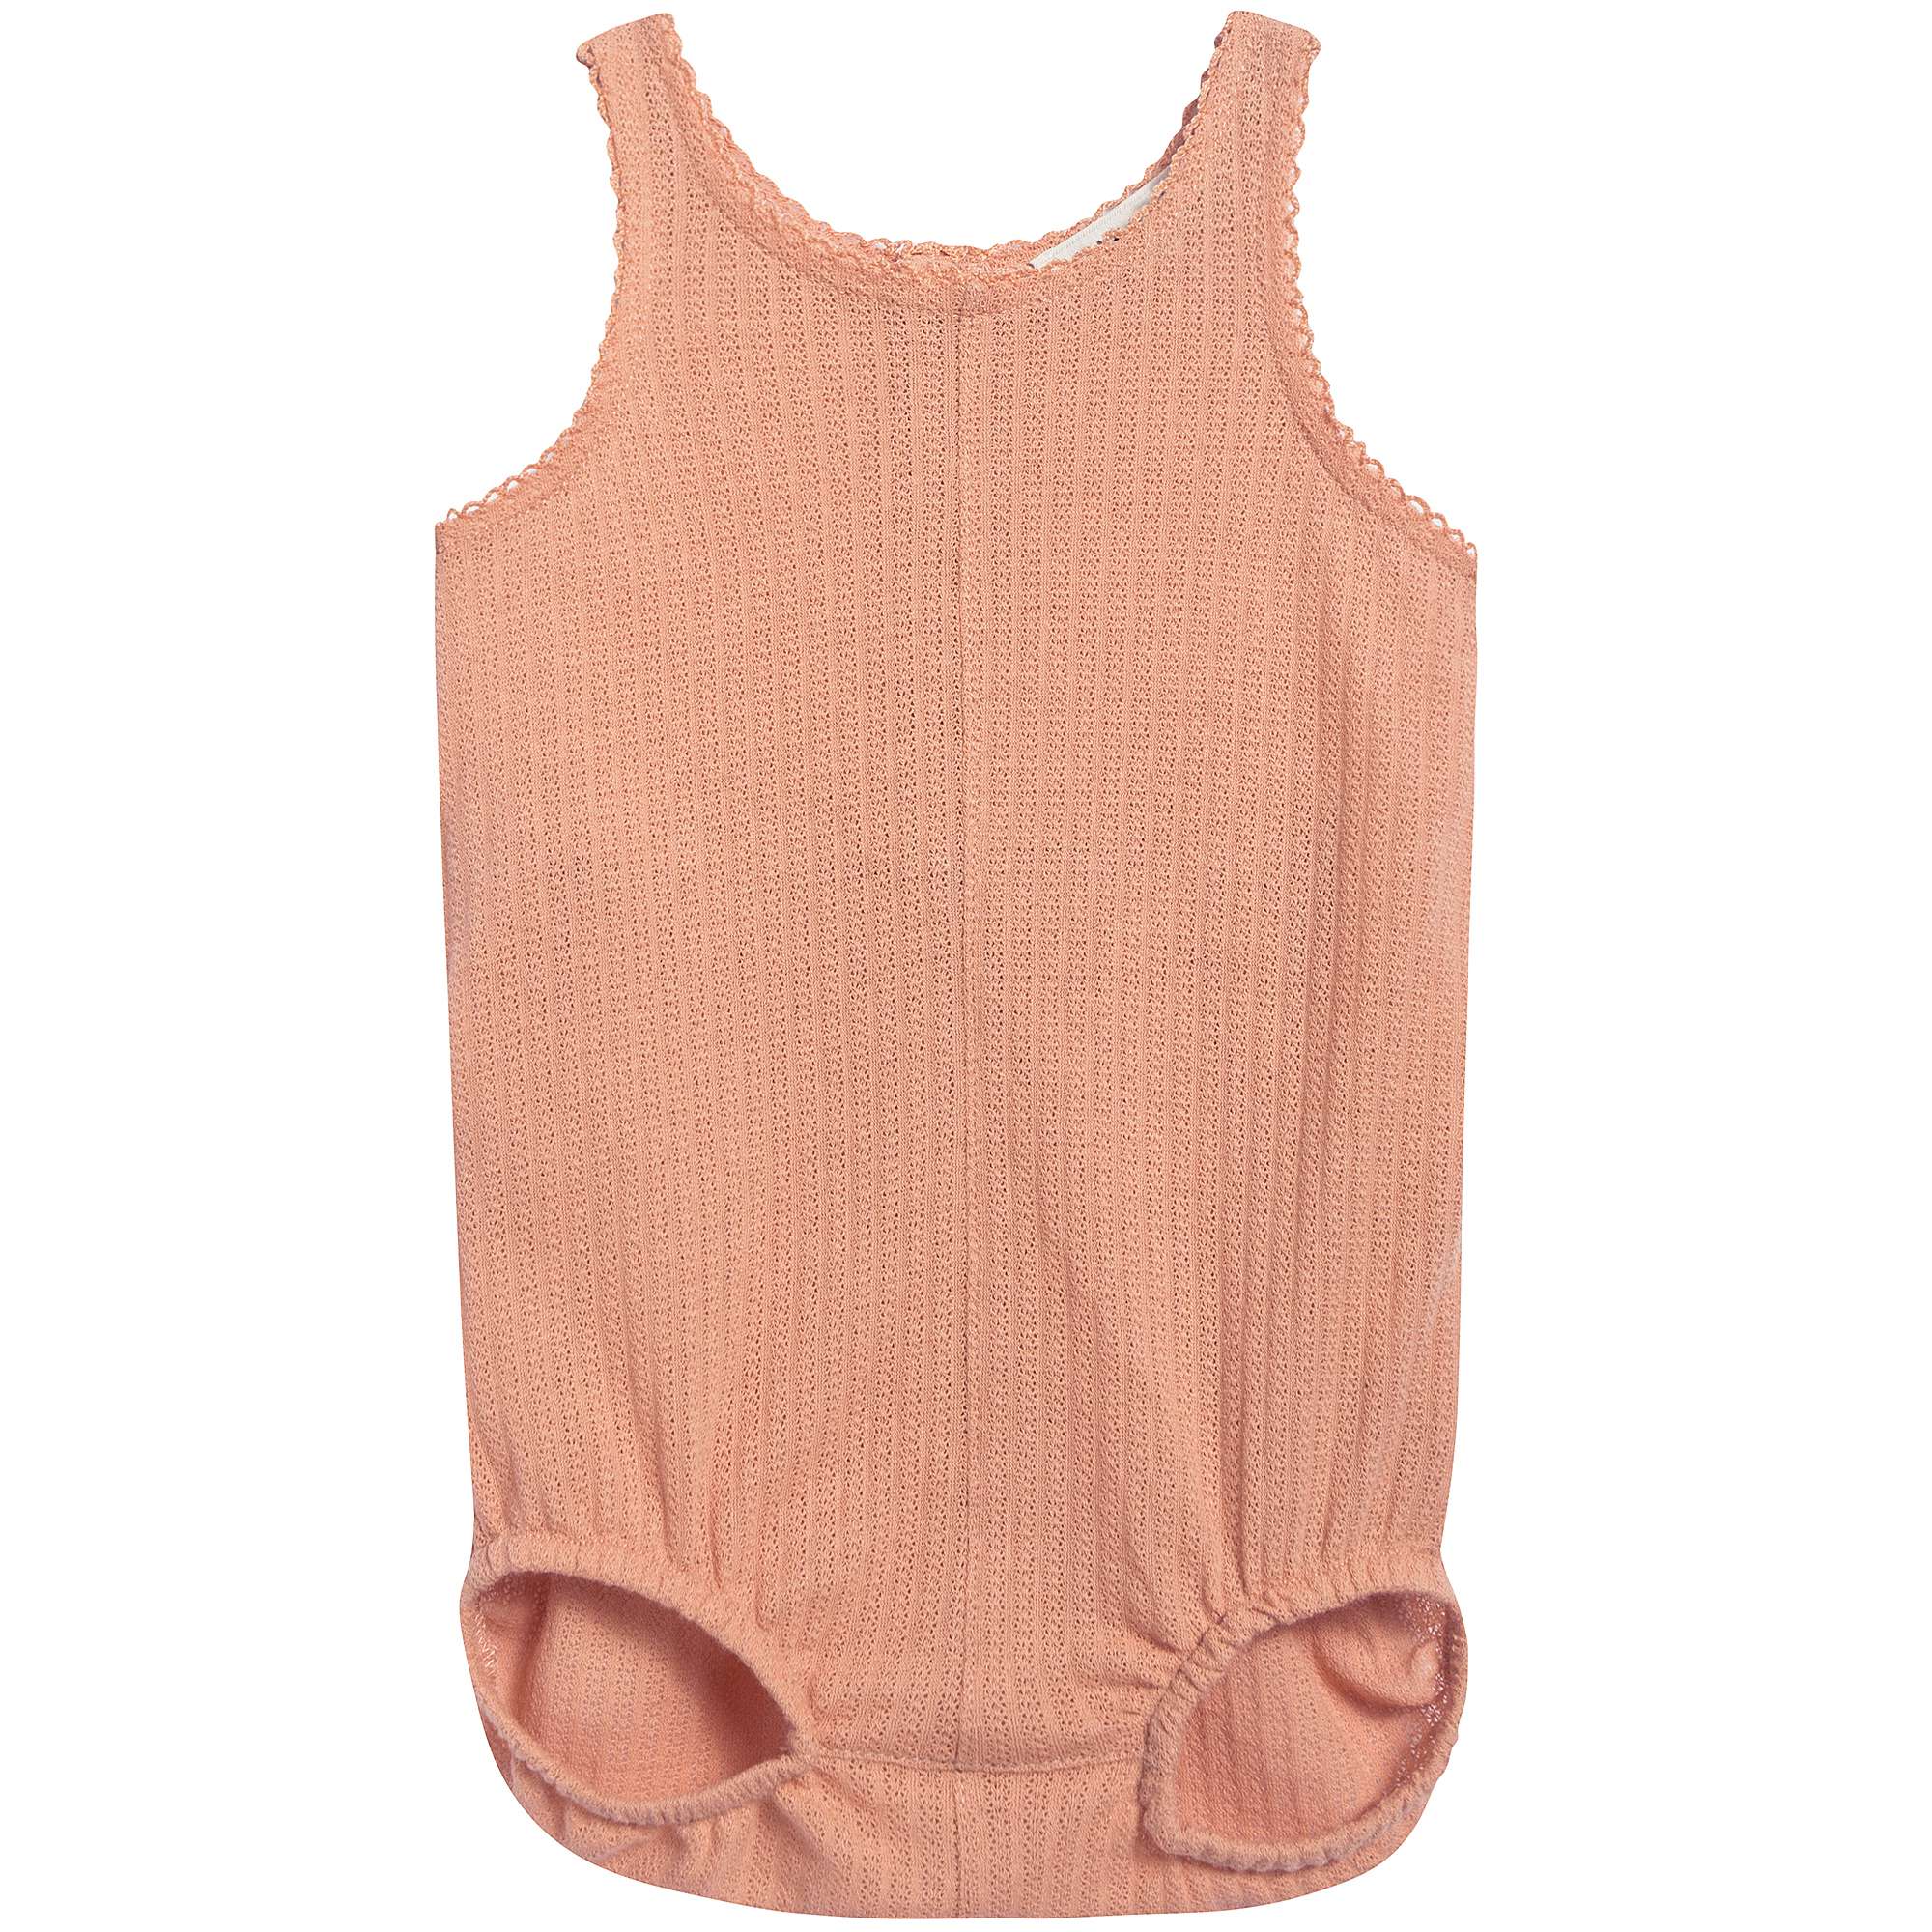 Baby Coray Pink Cotton Jersey Romper